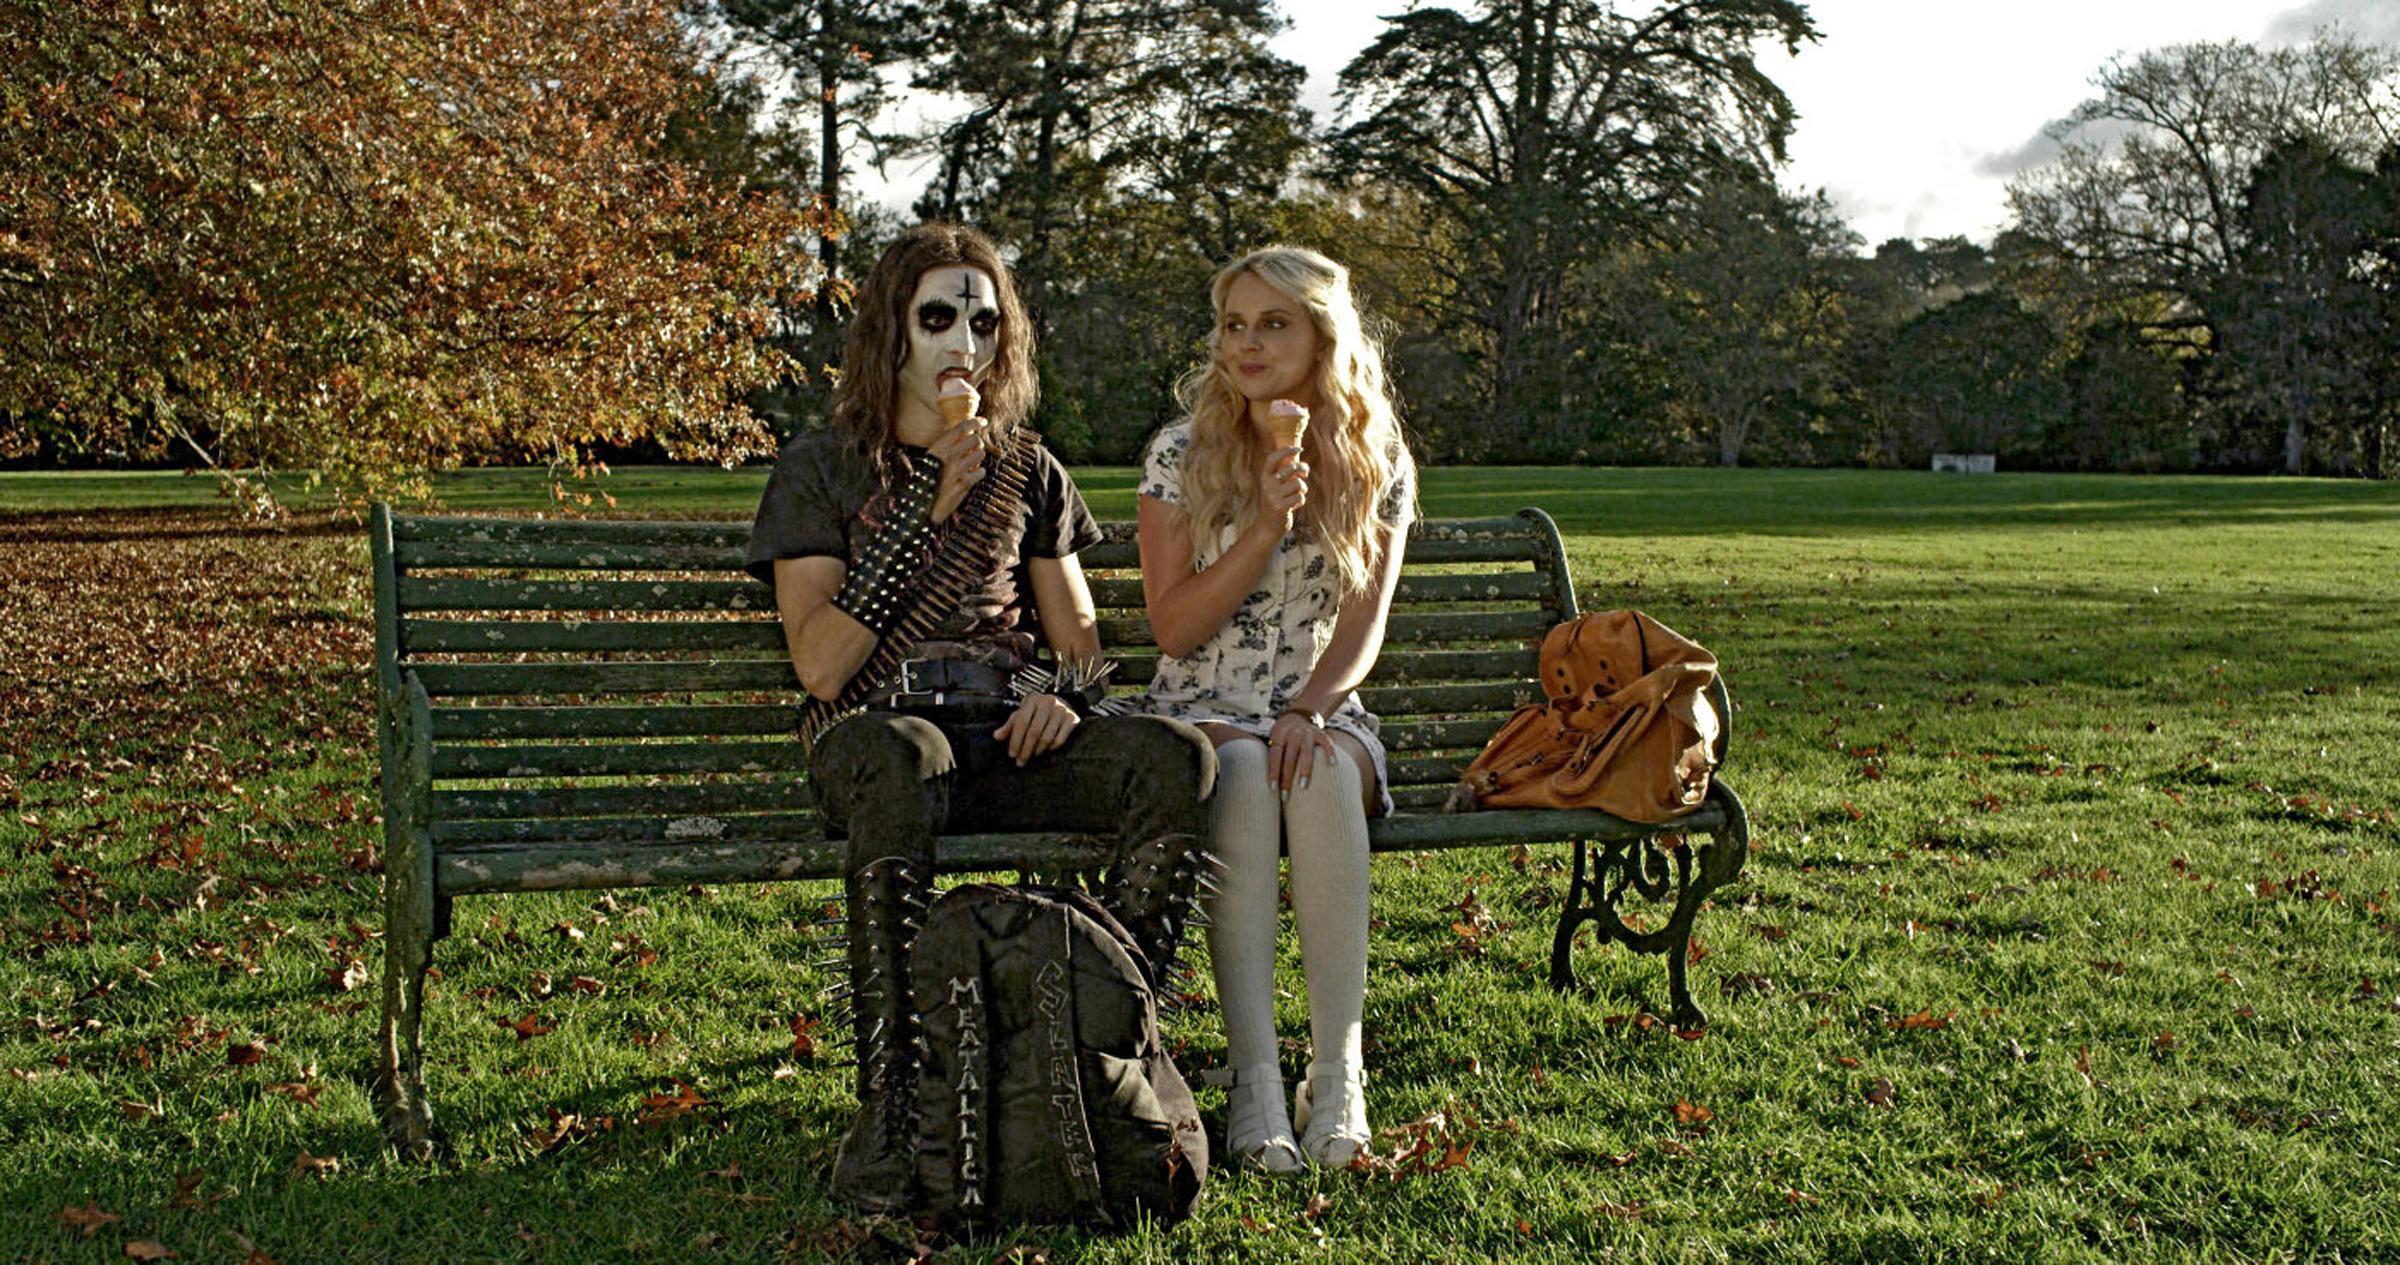 A death metal musician goes on a date with a glowing acquaintance in &quot;Deathgasm&quot;